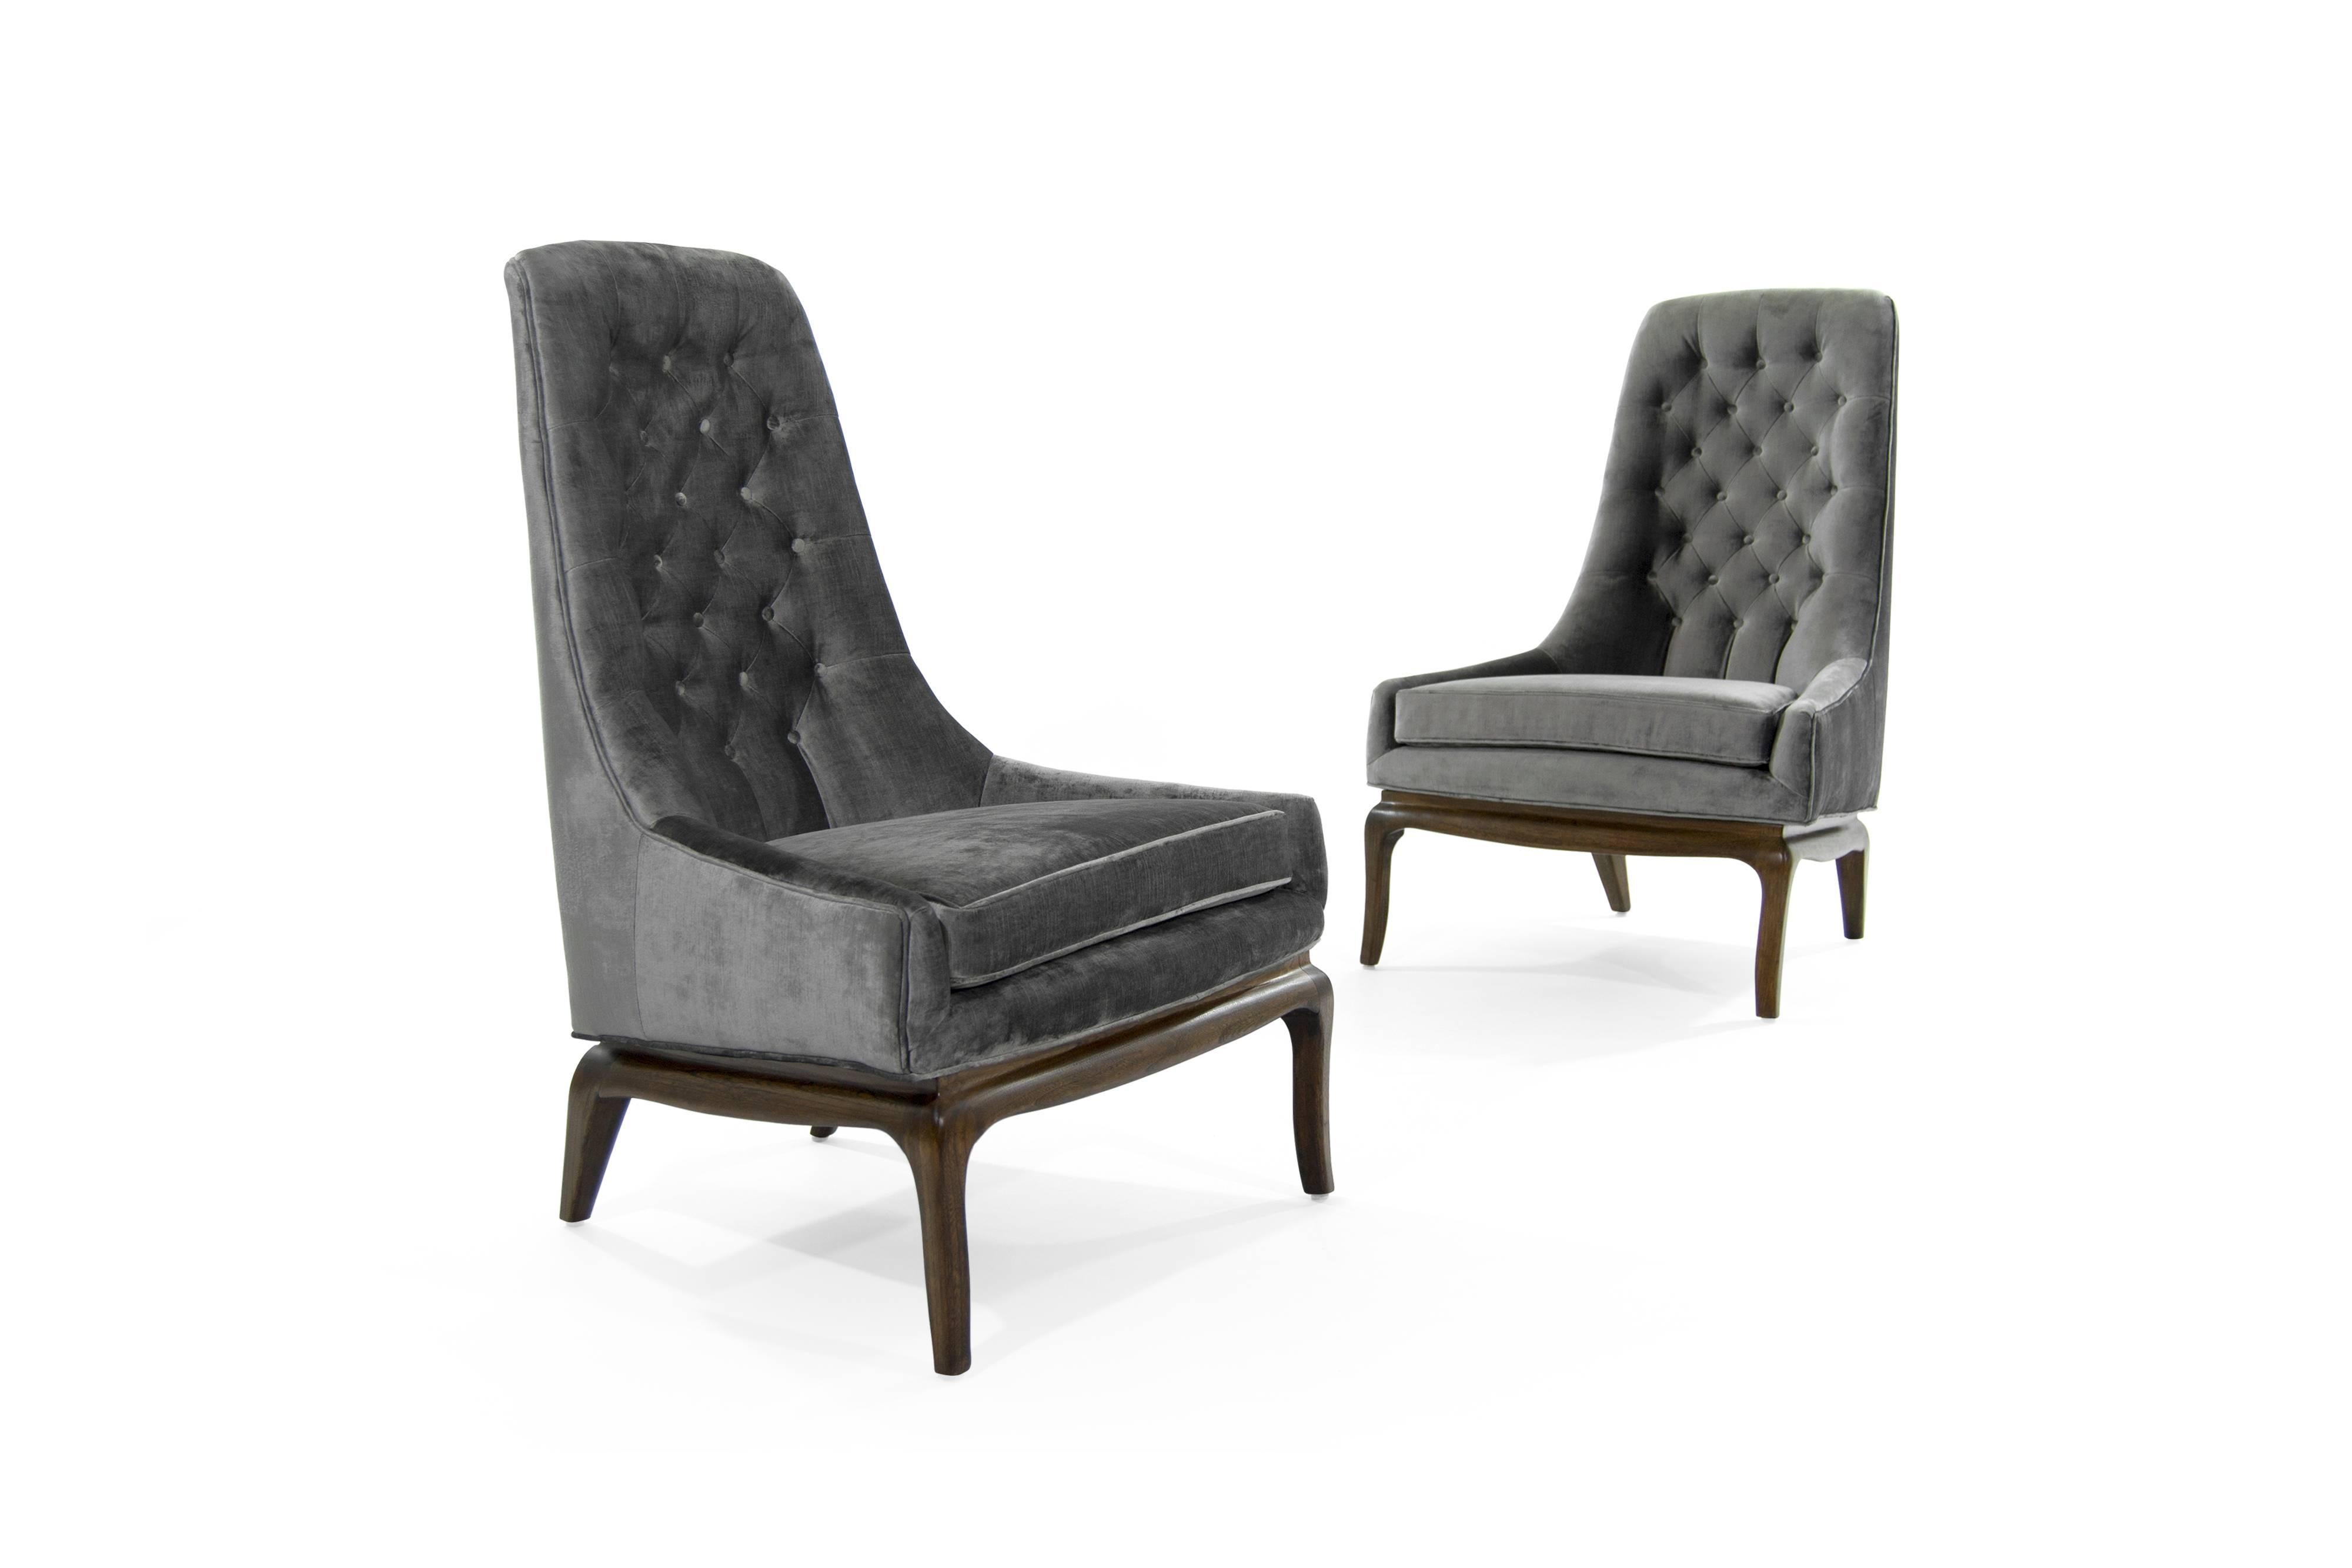 Exquisite and elegant pair of tufted high back lounge chairs on walnut sabre leg walnut bases, in the style of T.H. Robsjohn-Gibbings. Walnut fully restored, newly reupholstered in a shiny grey velvet.